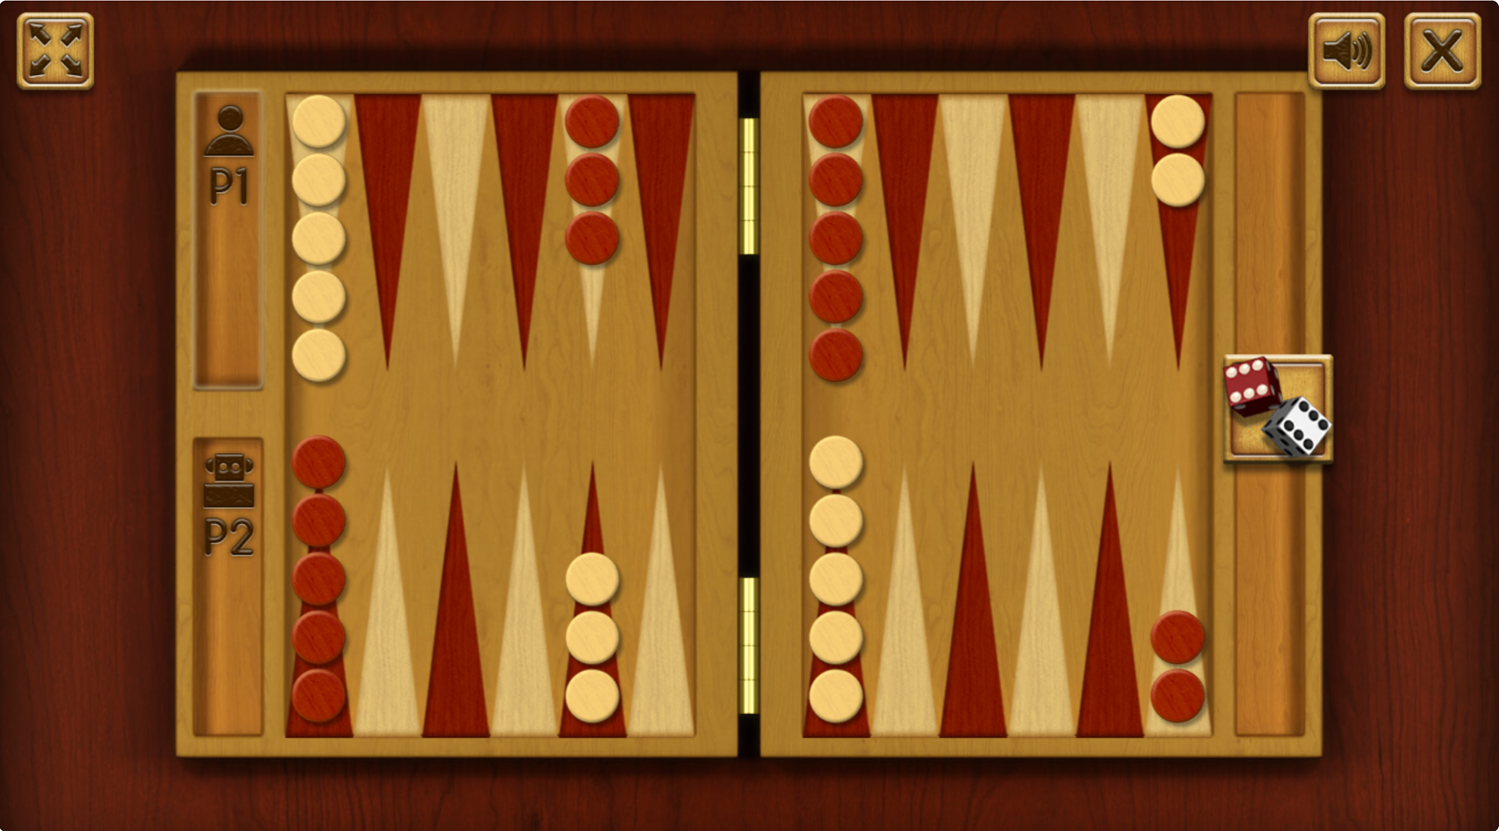 play backgammon online with friends app